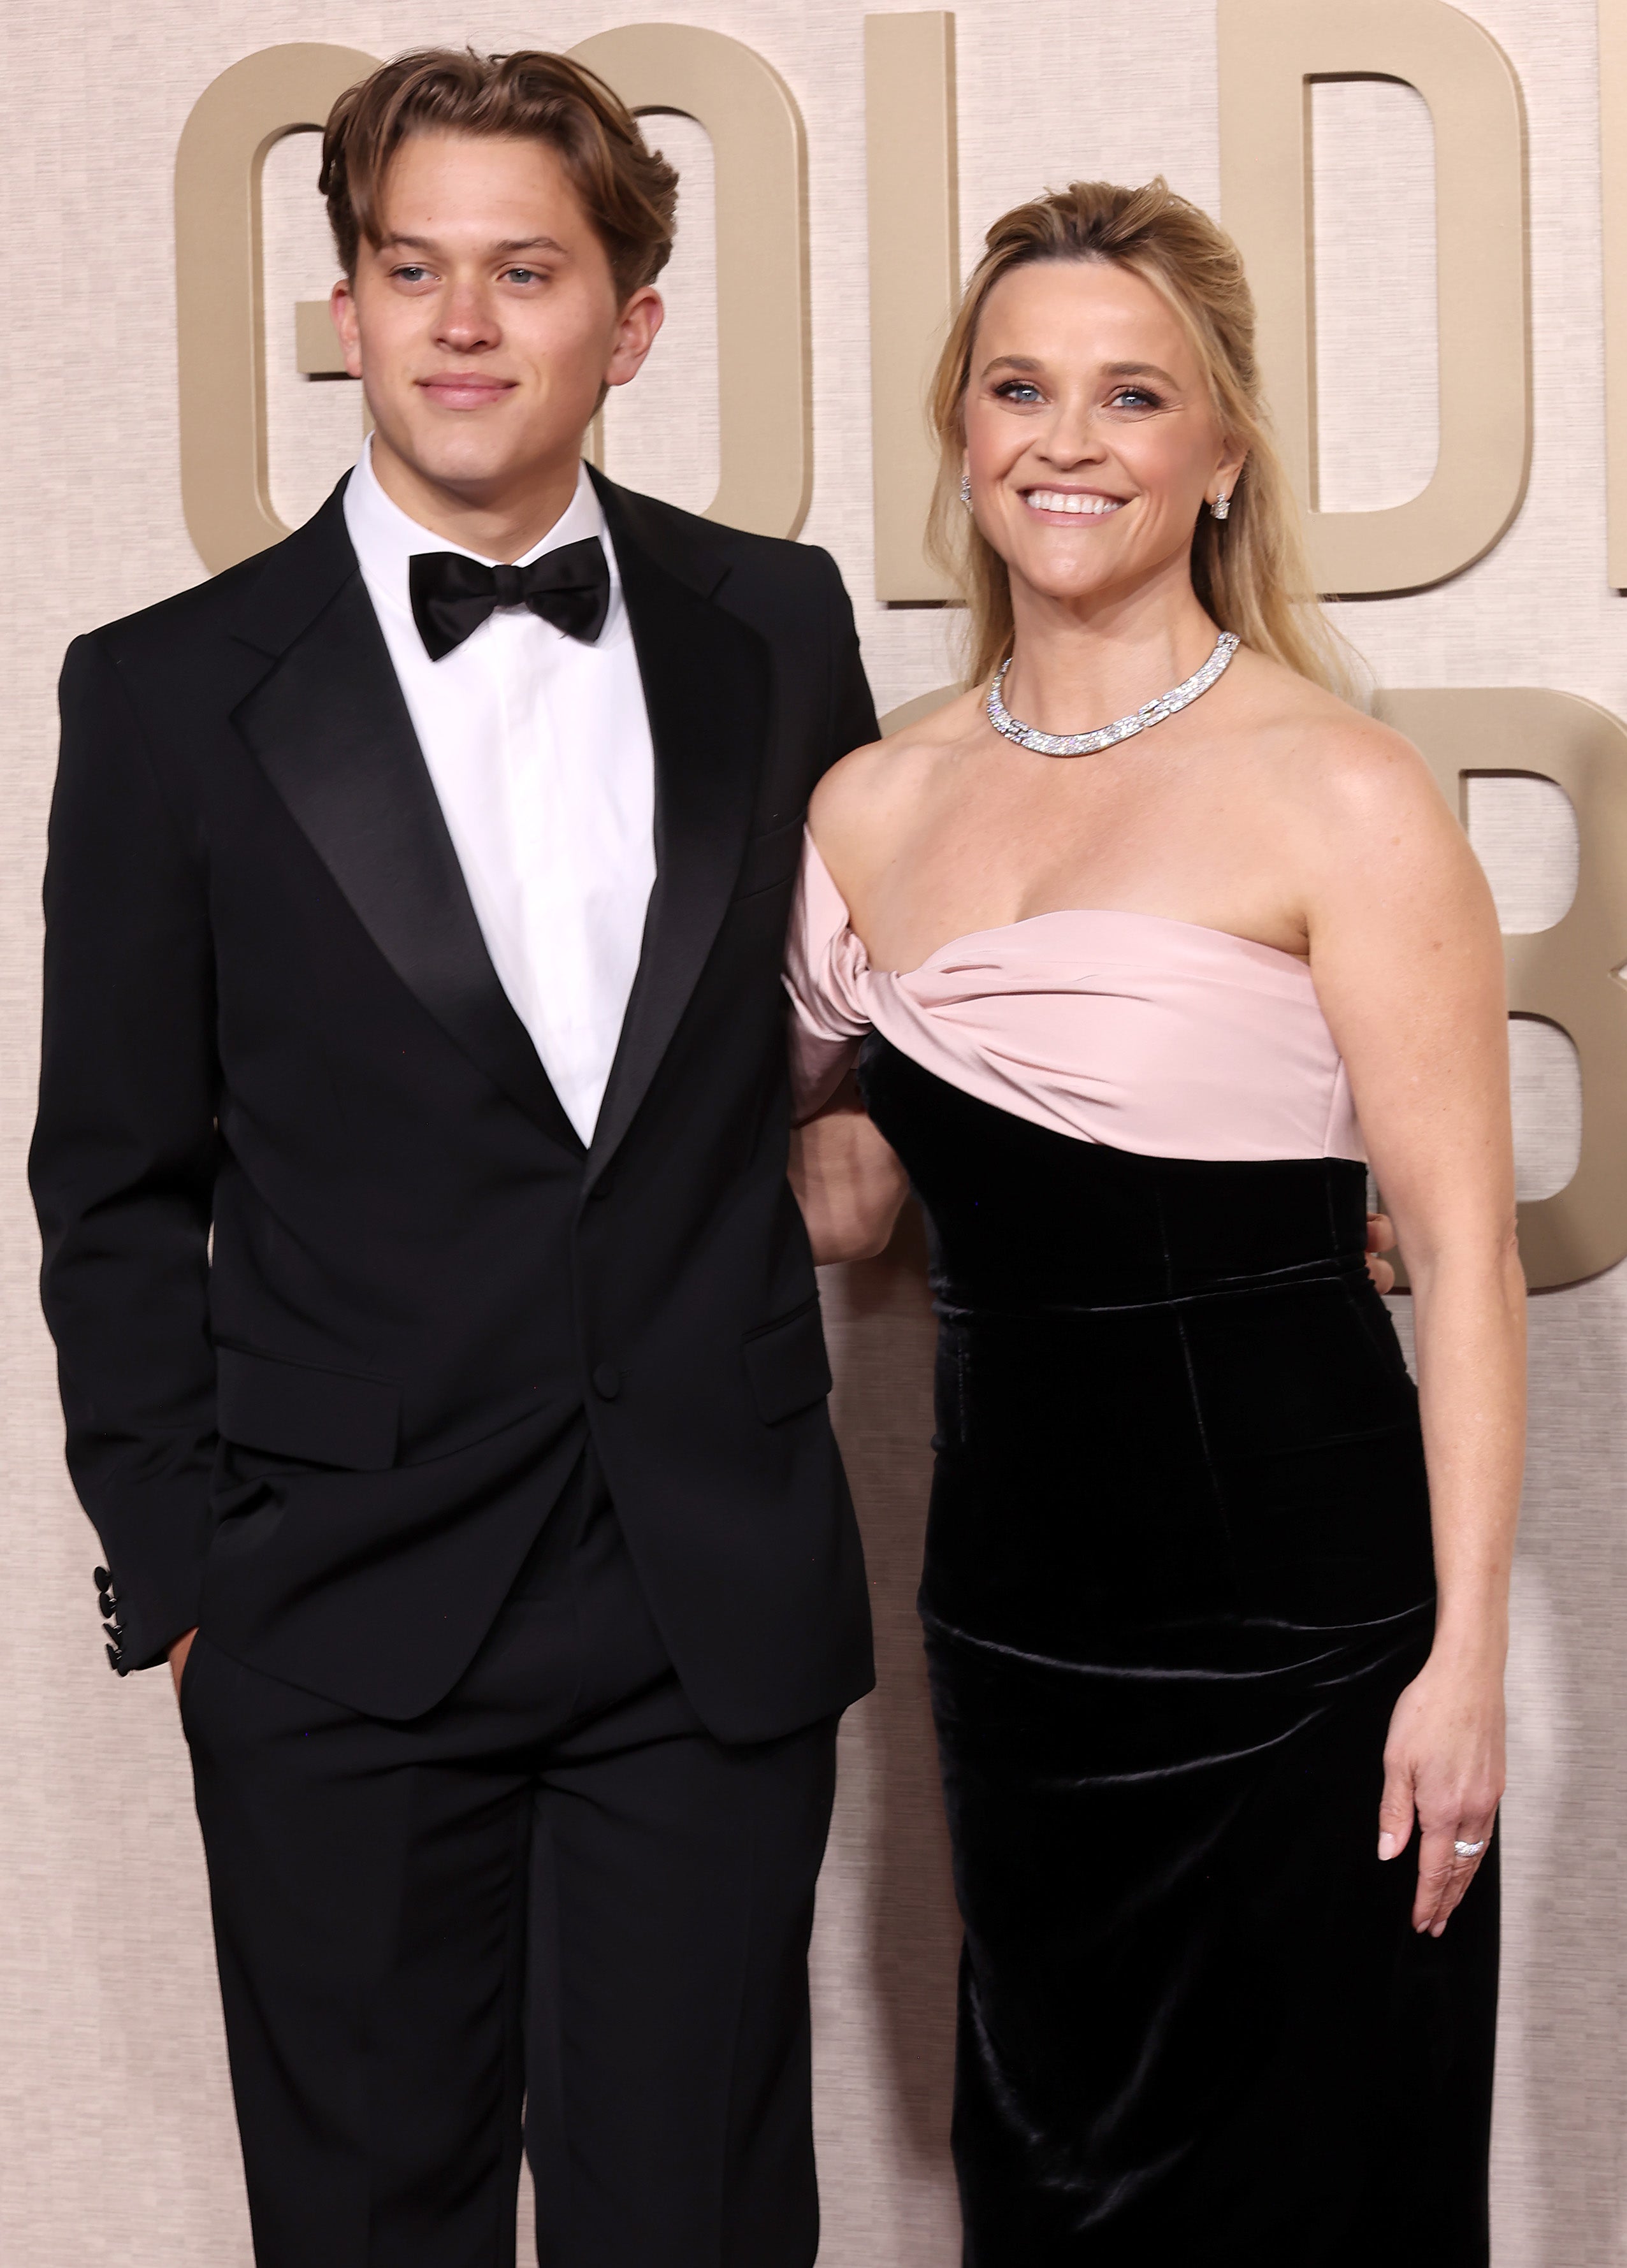 Reese Witherspoon with her son Deacon Reese Phillippe at the Golden Globes